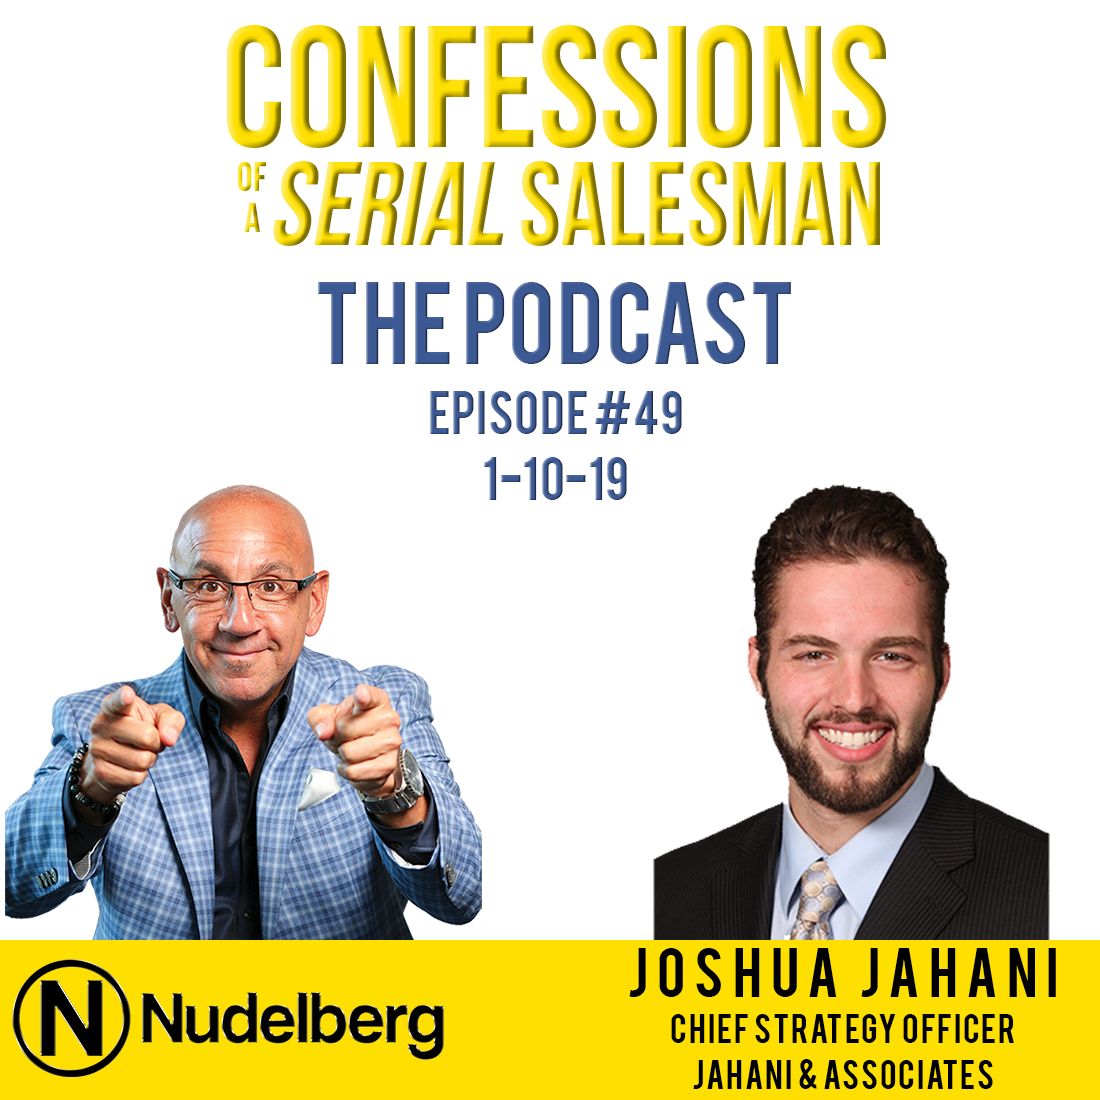 Confessions of a Serial Salesman The Podcast with Joshua Jahani